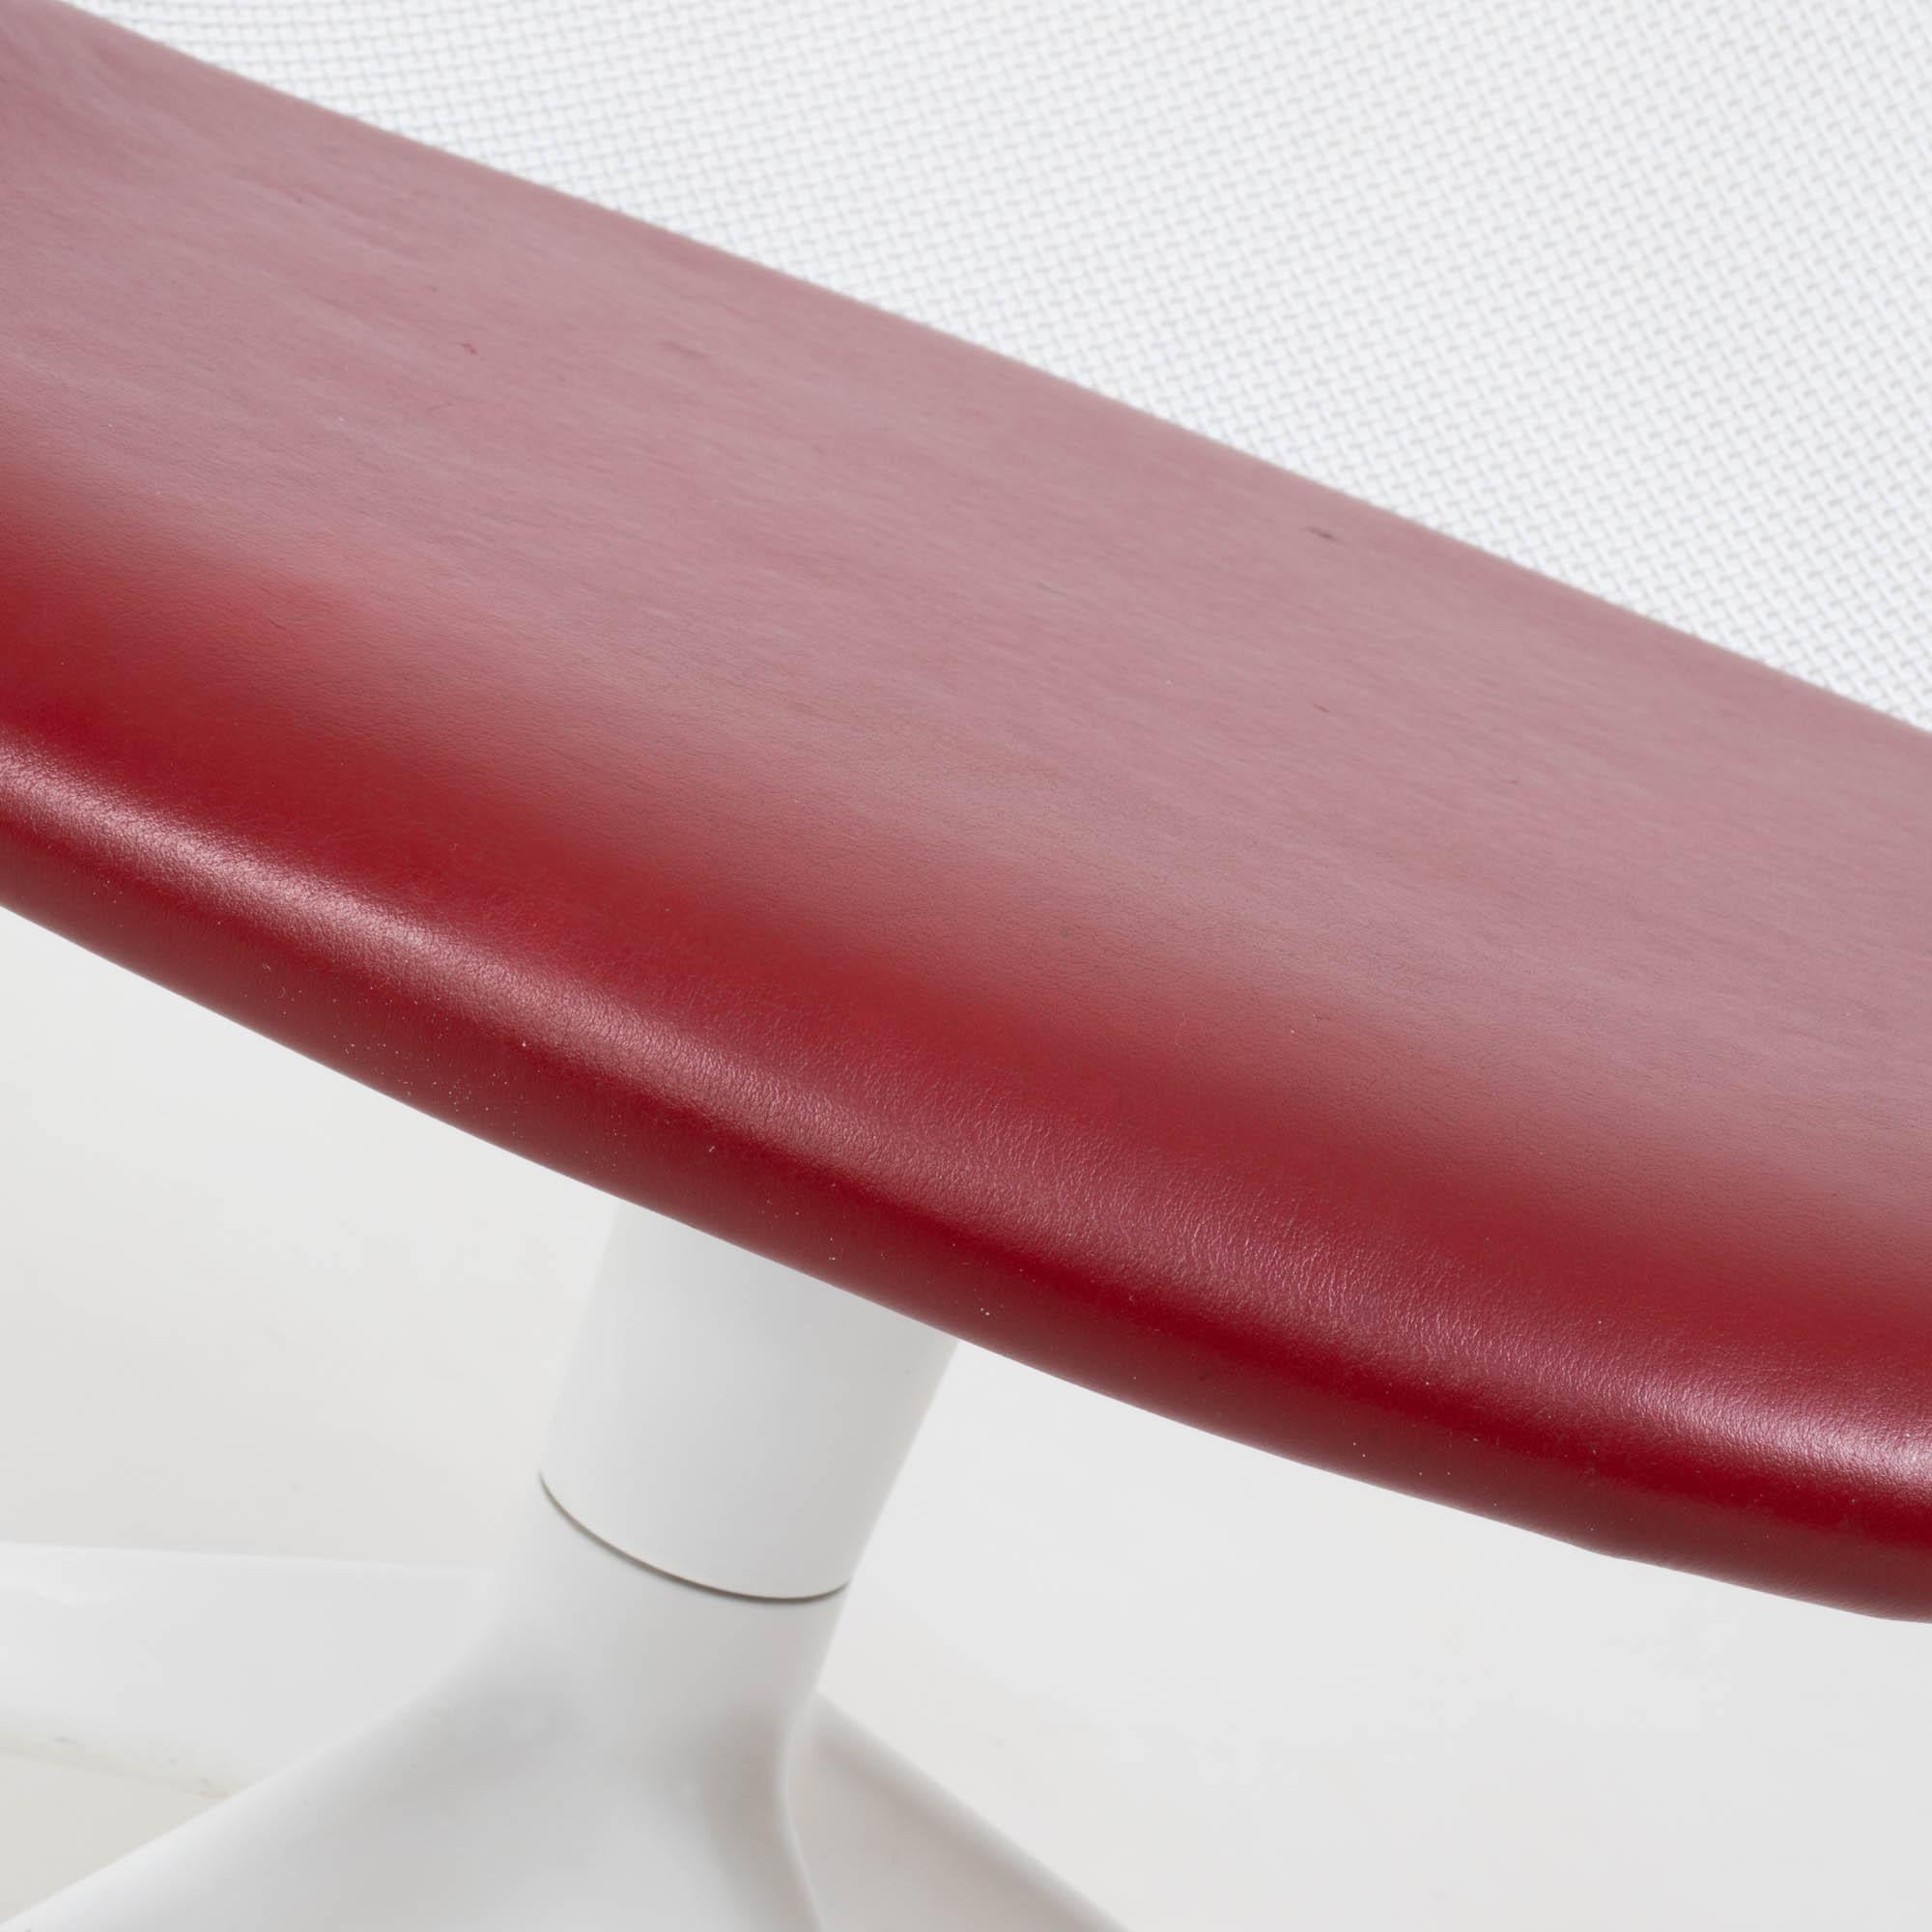 Metal B&B Italia by Antonio Citterio, Luta White and Red Leather Swivel Dining Chairs